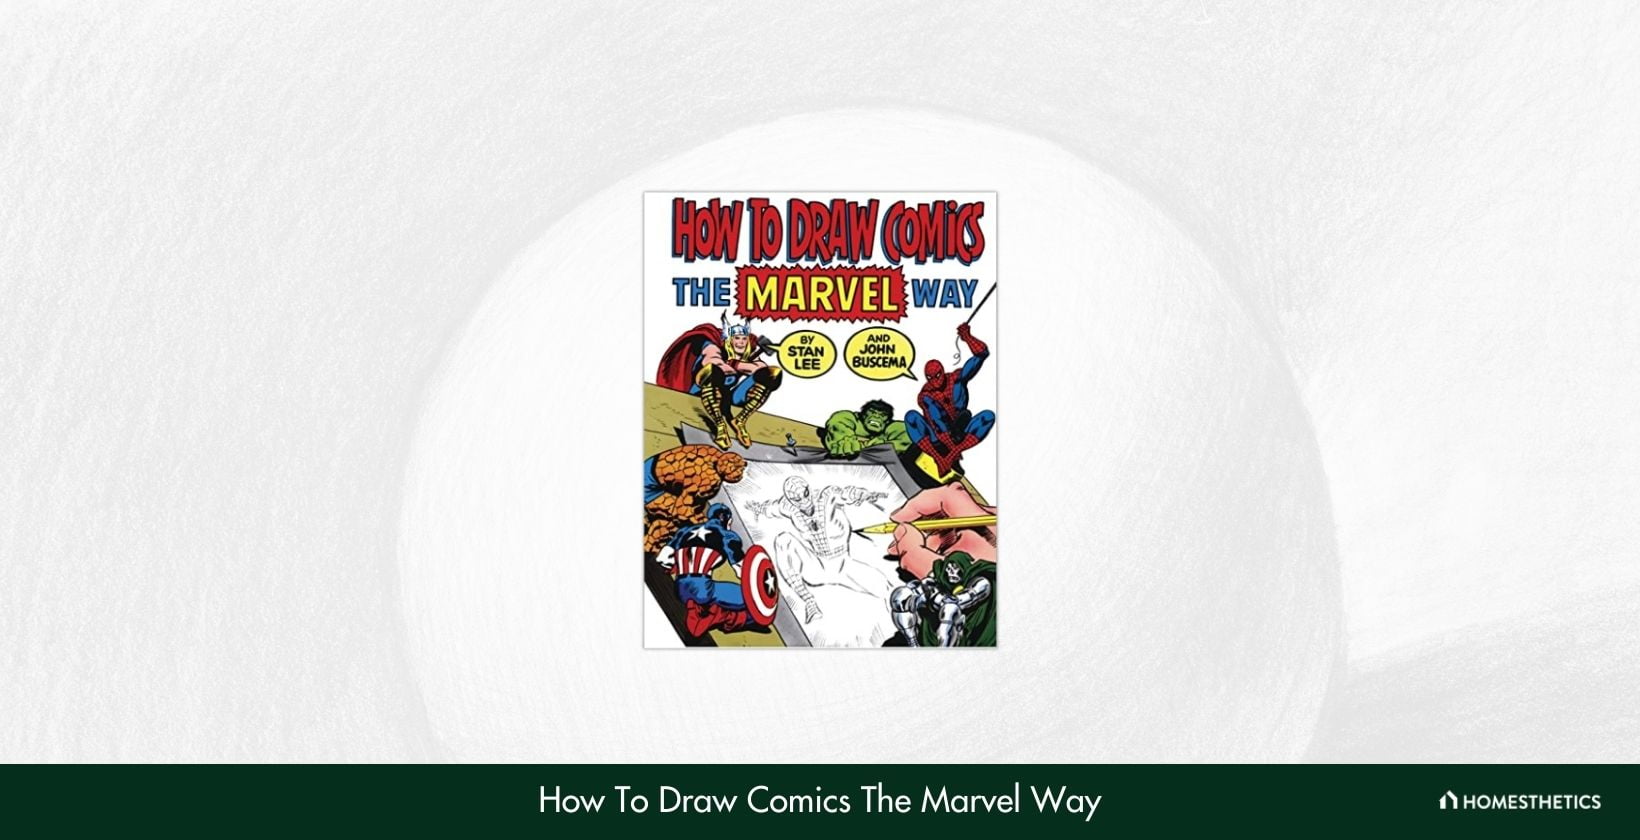 How To Draw Comics The Marvel Way by Stan Lee and John Buscema